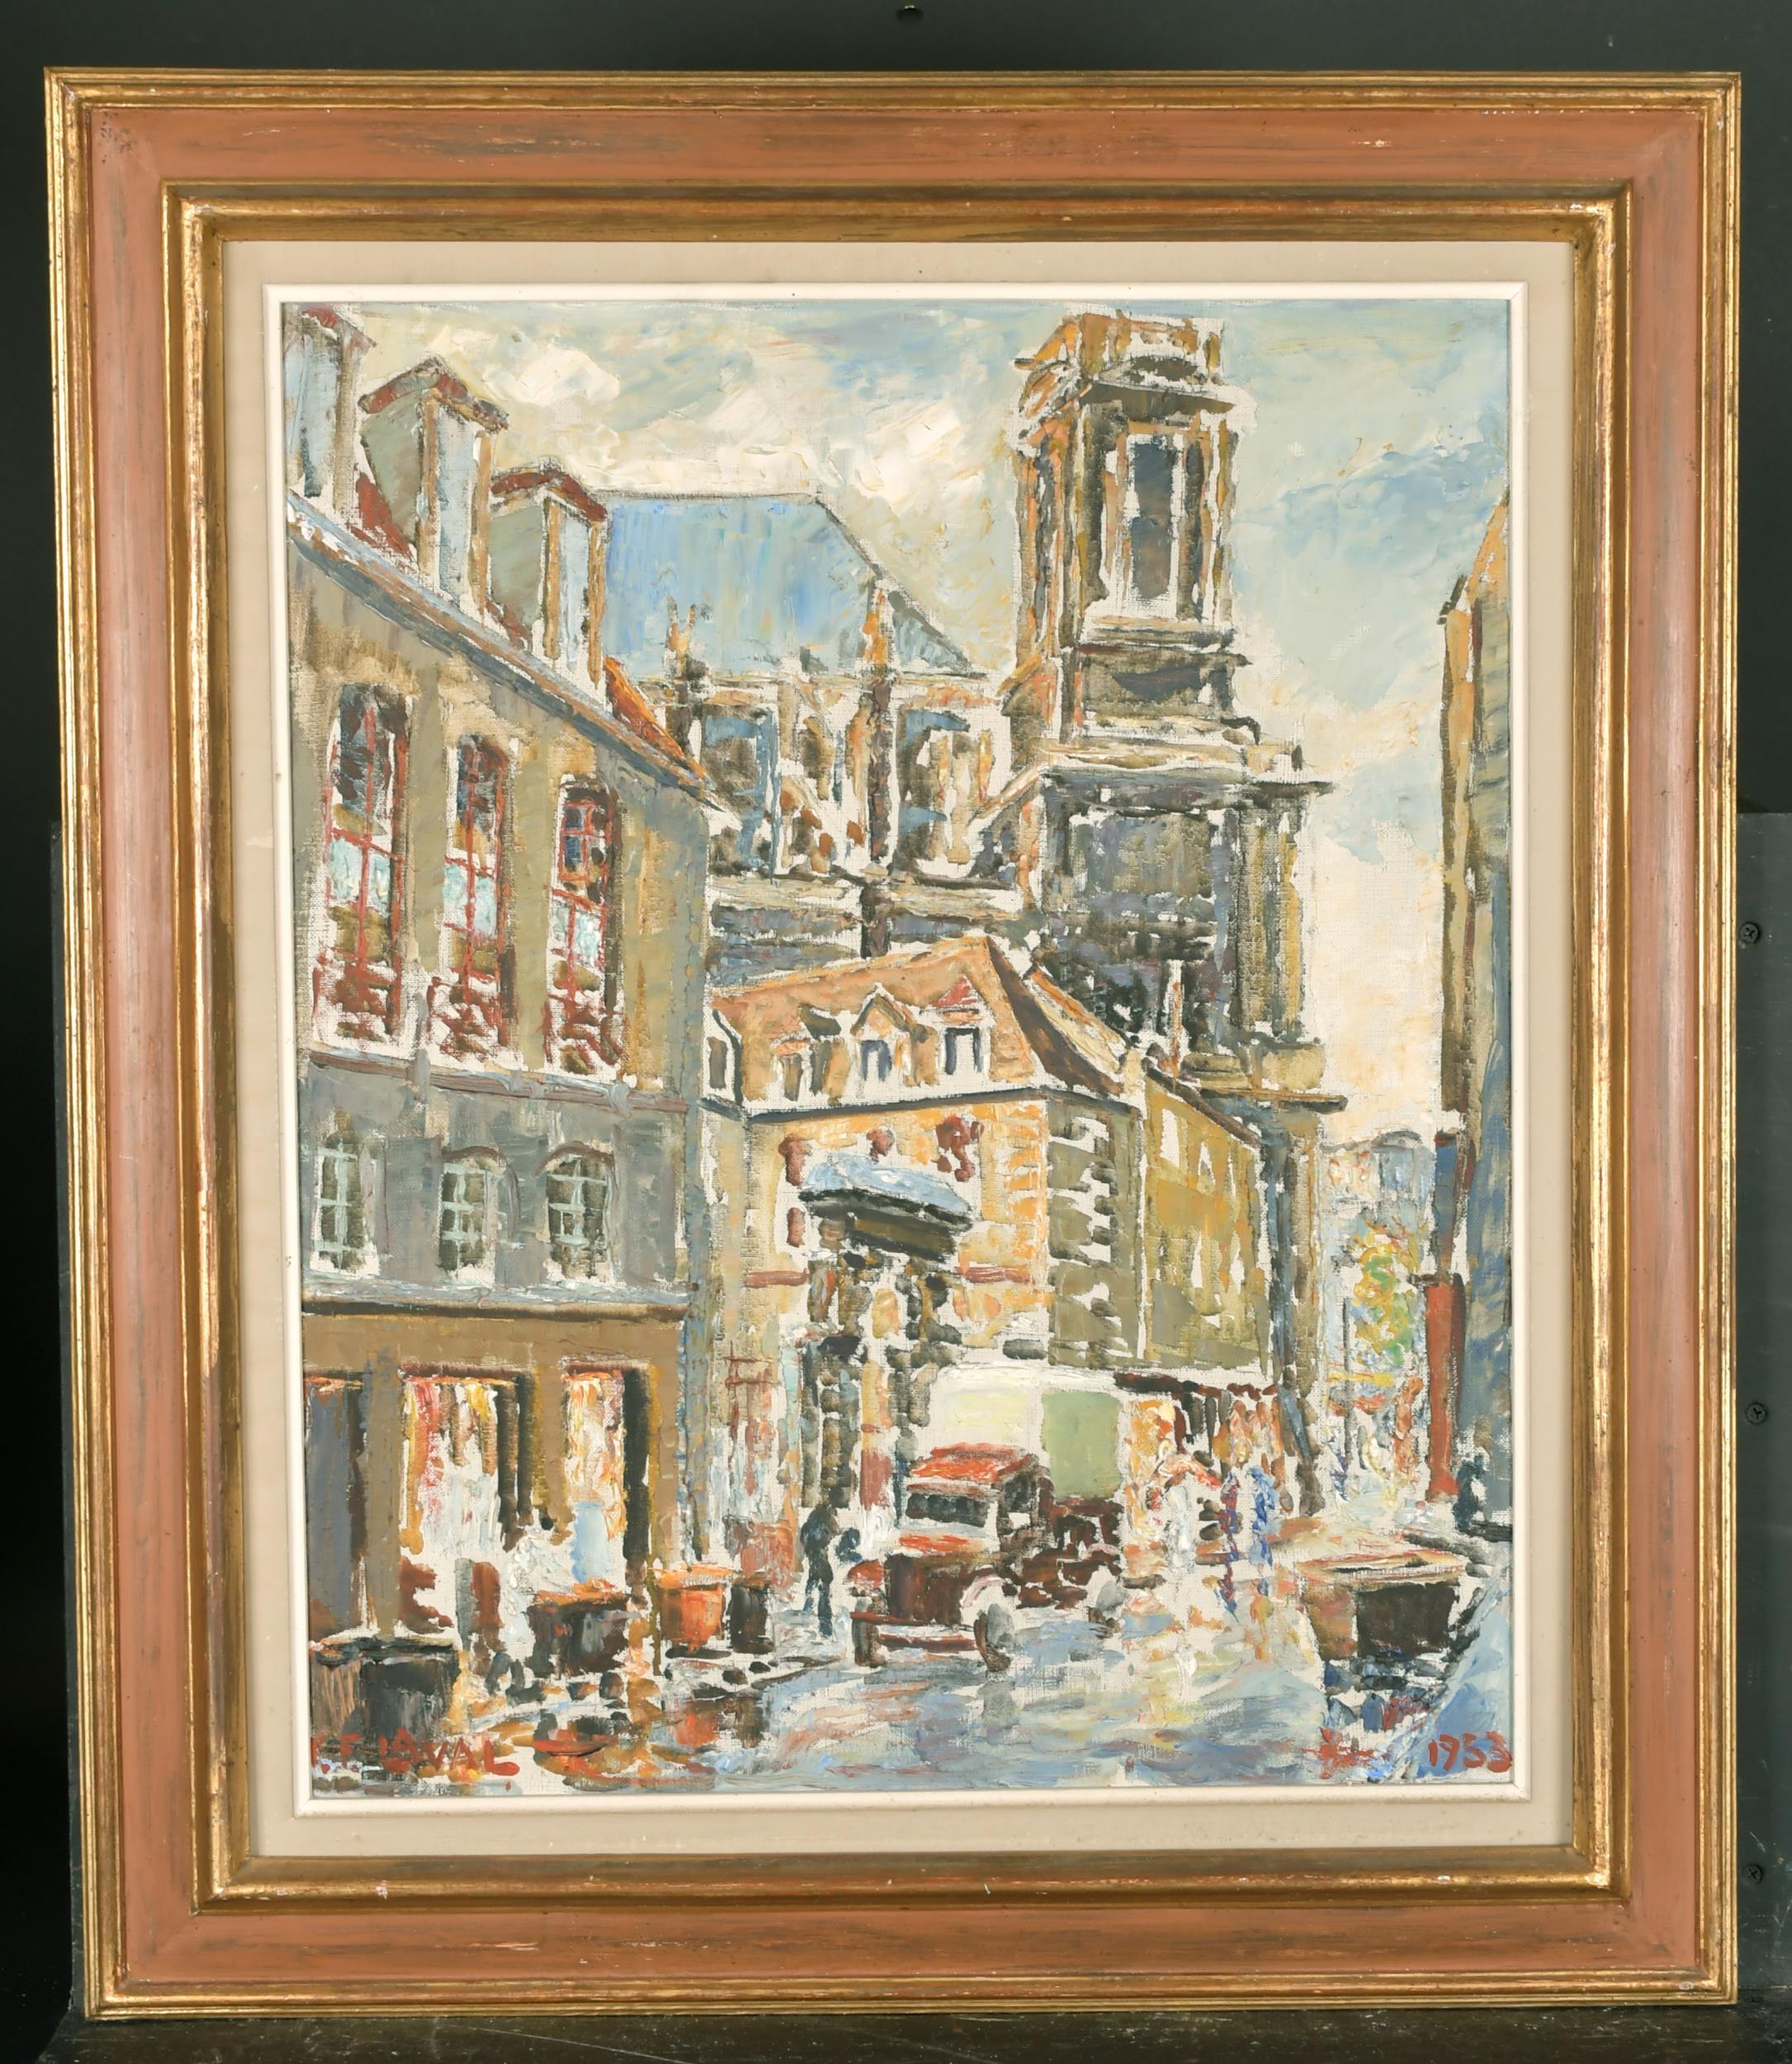 Large 1950's French Impressionist Signed Oil - Busy Street Scene in France - Painting by Fernand LAVAL